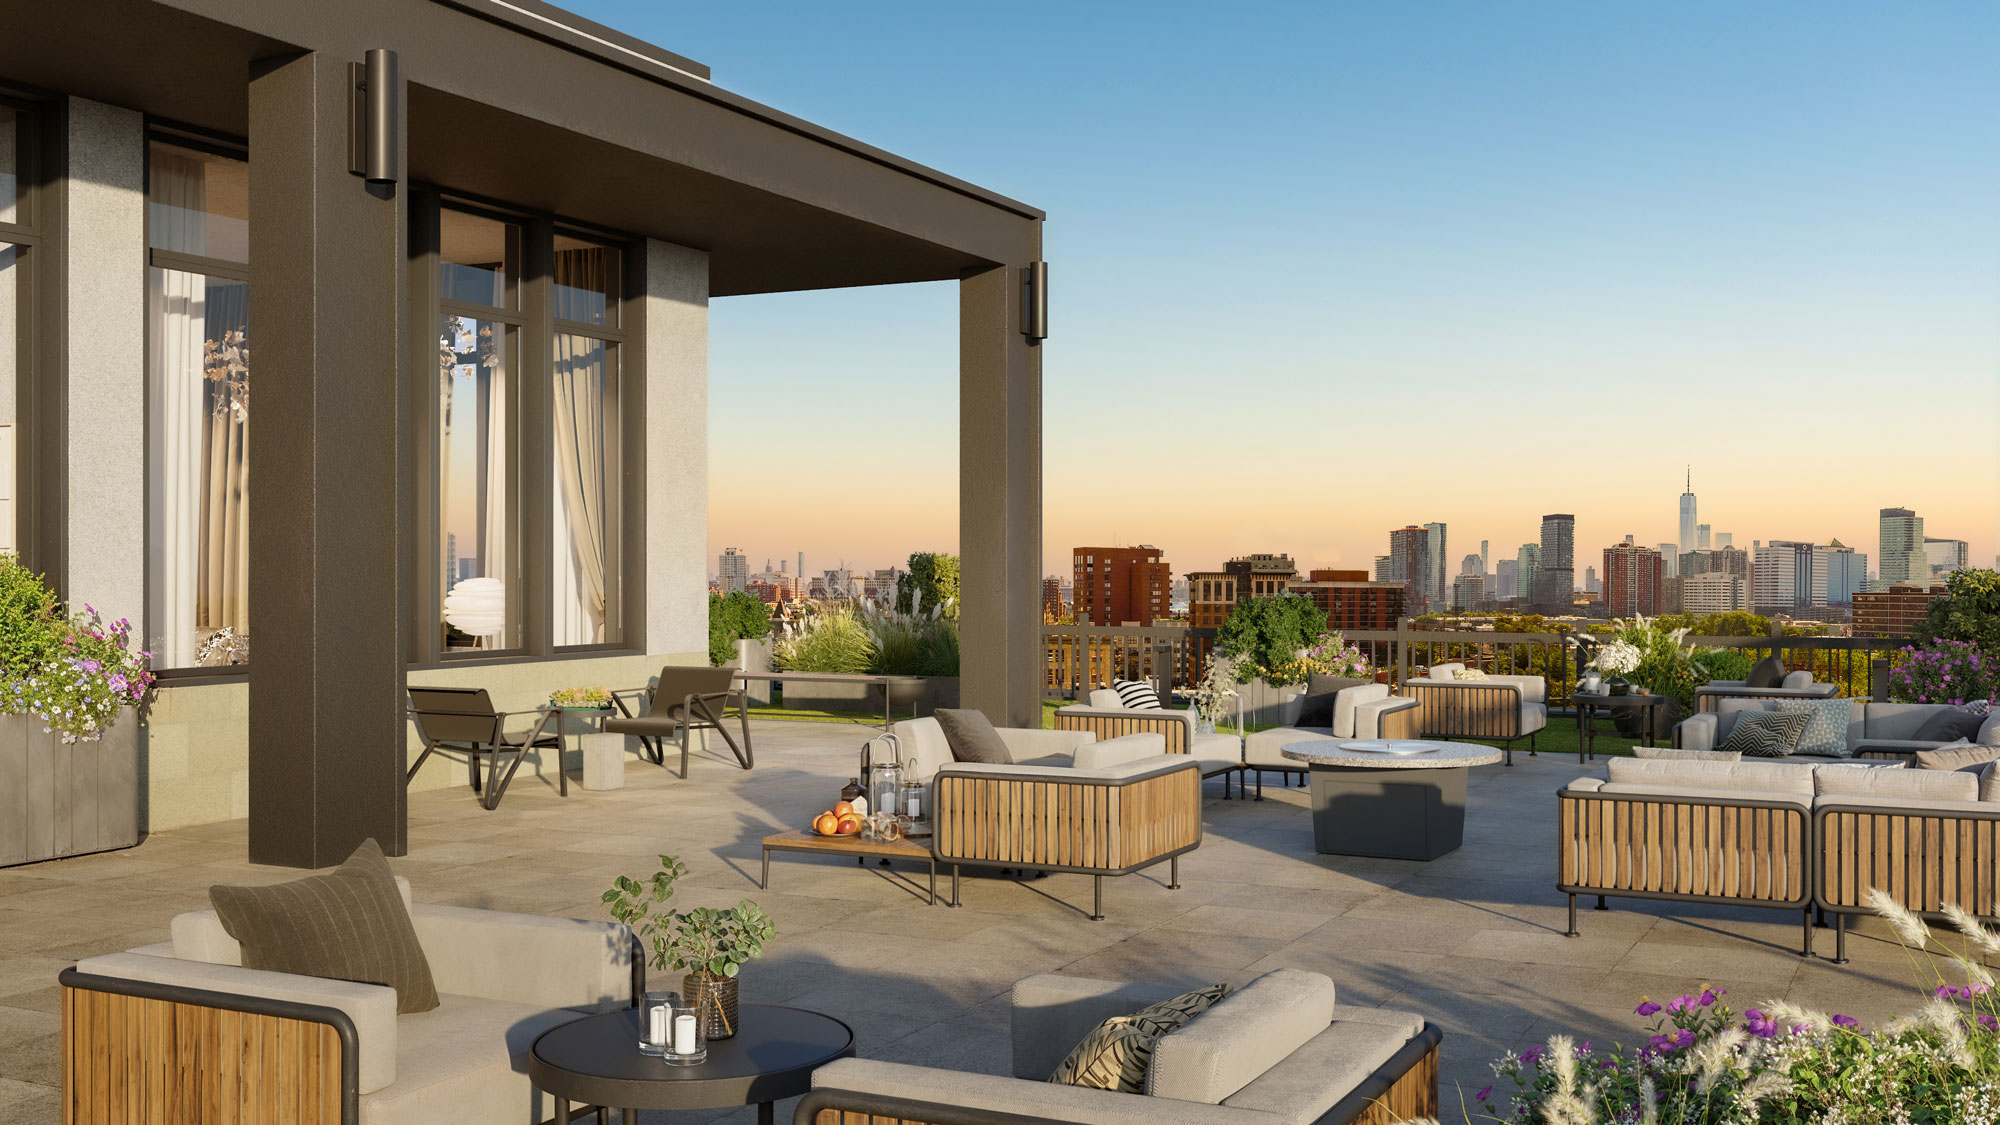 A rooftop lounging area with a skyline view, various seating spaces, a firpit and plant decor